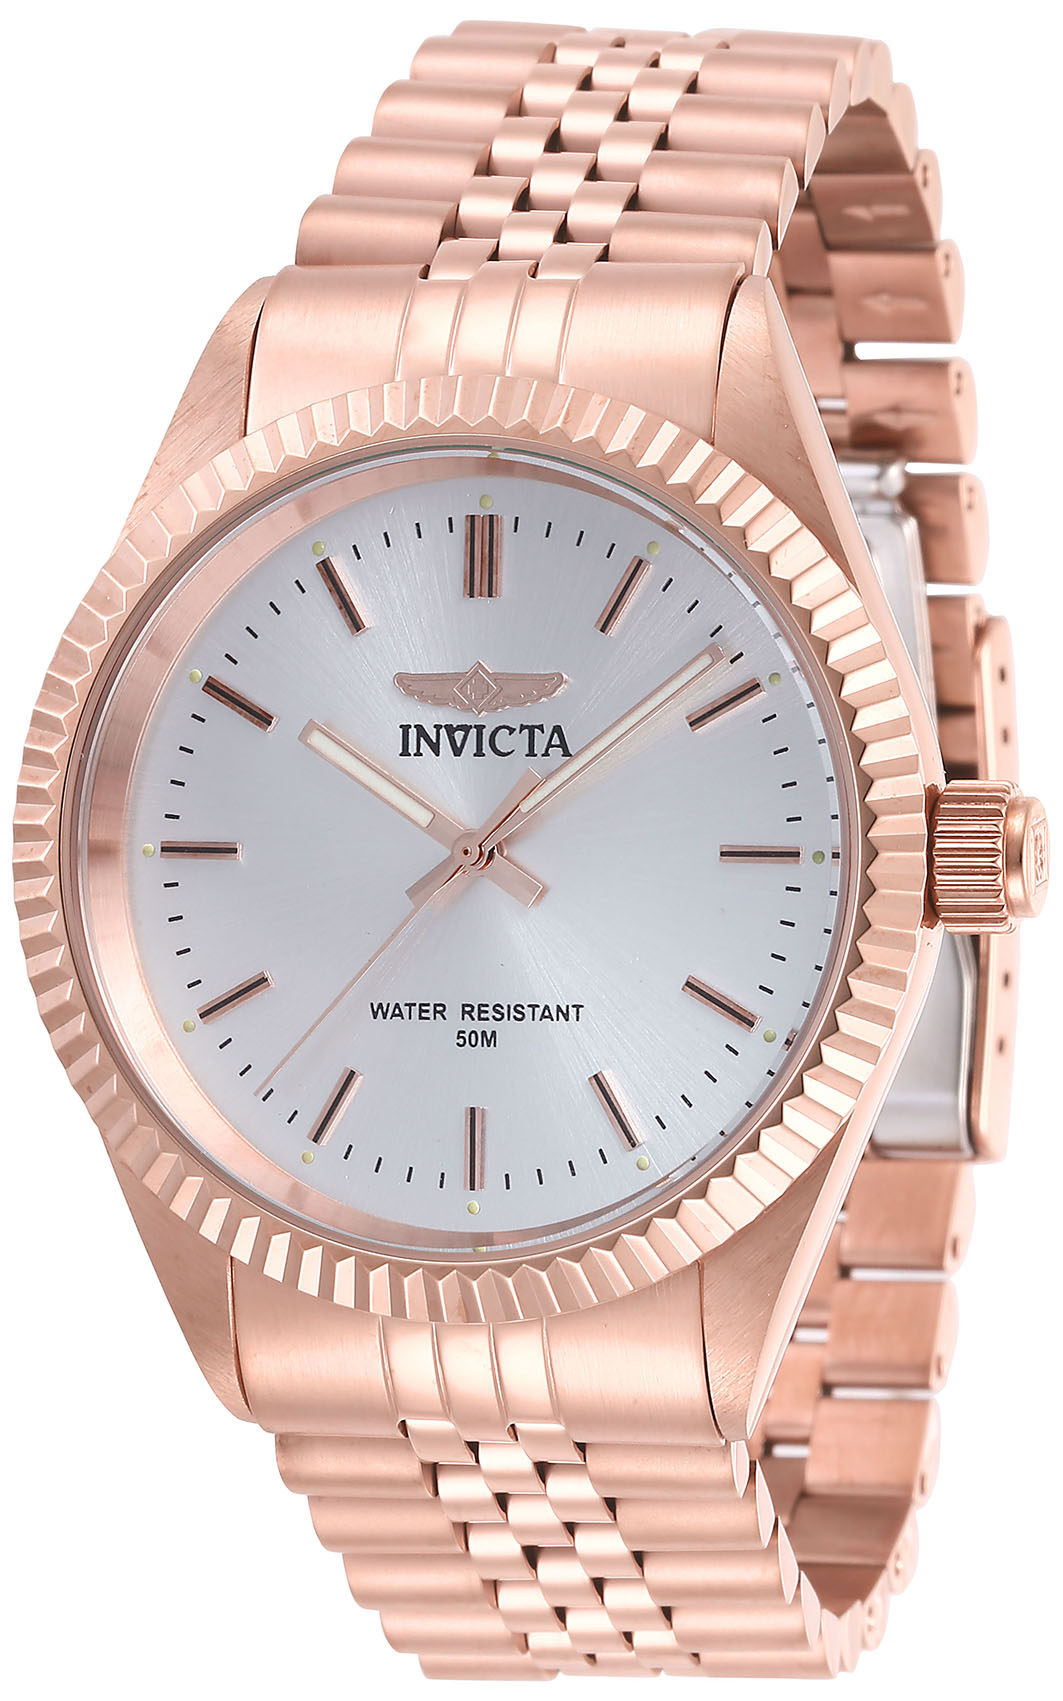 Invicta Specialty Men's Watch - 43mm, Rose Gold (29390)